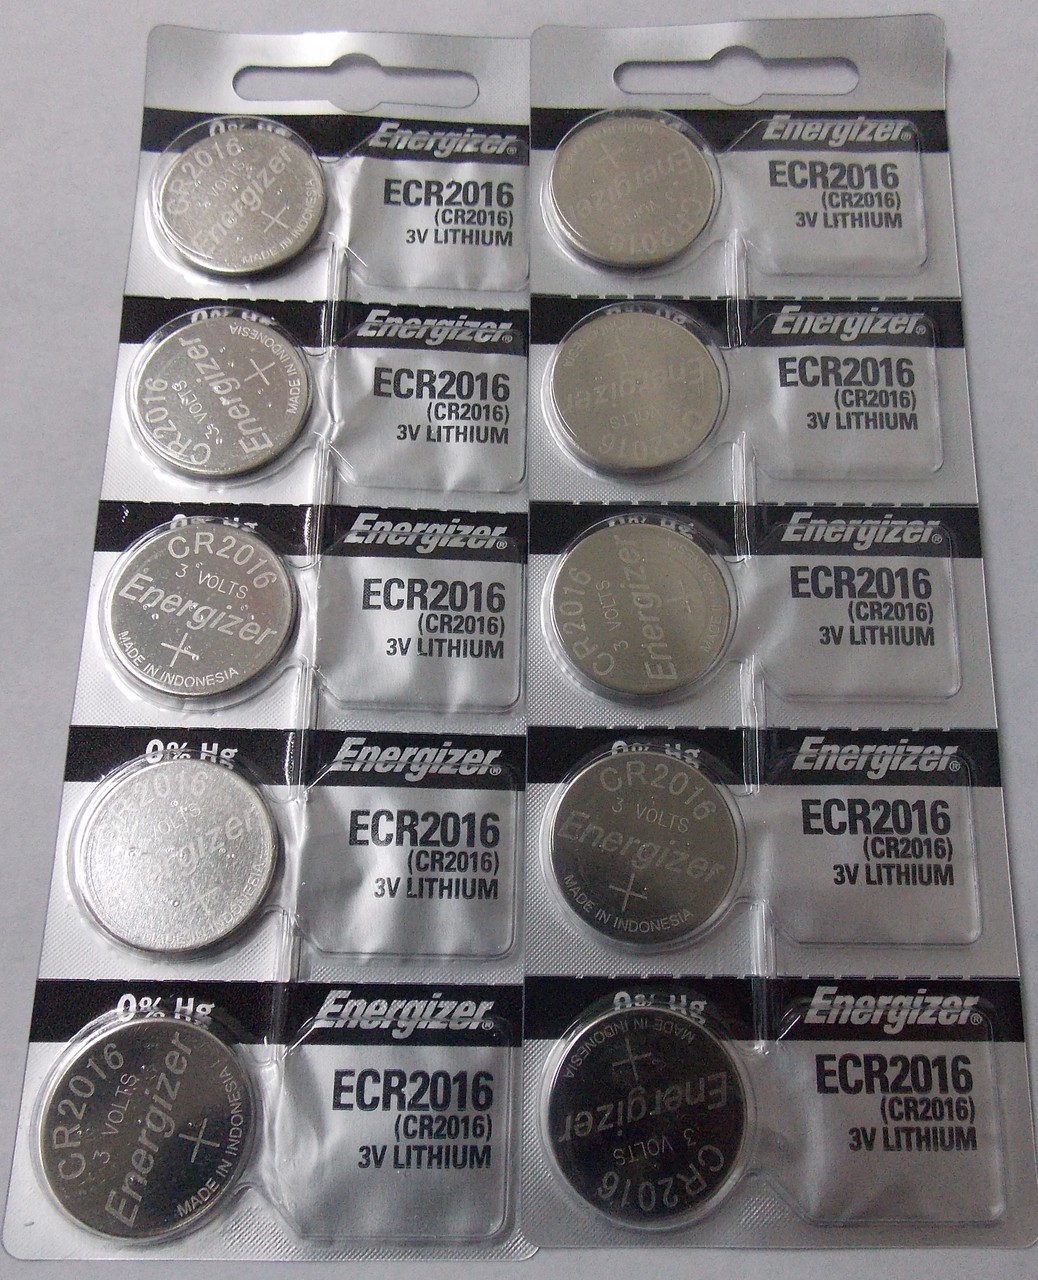 Energizer CR2016 3V Lithium Coin Battery - 10 Pack + FREE SHIPPING!